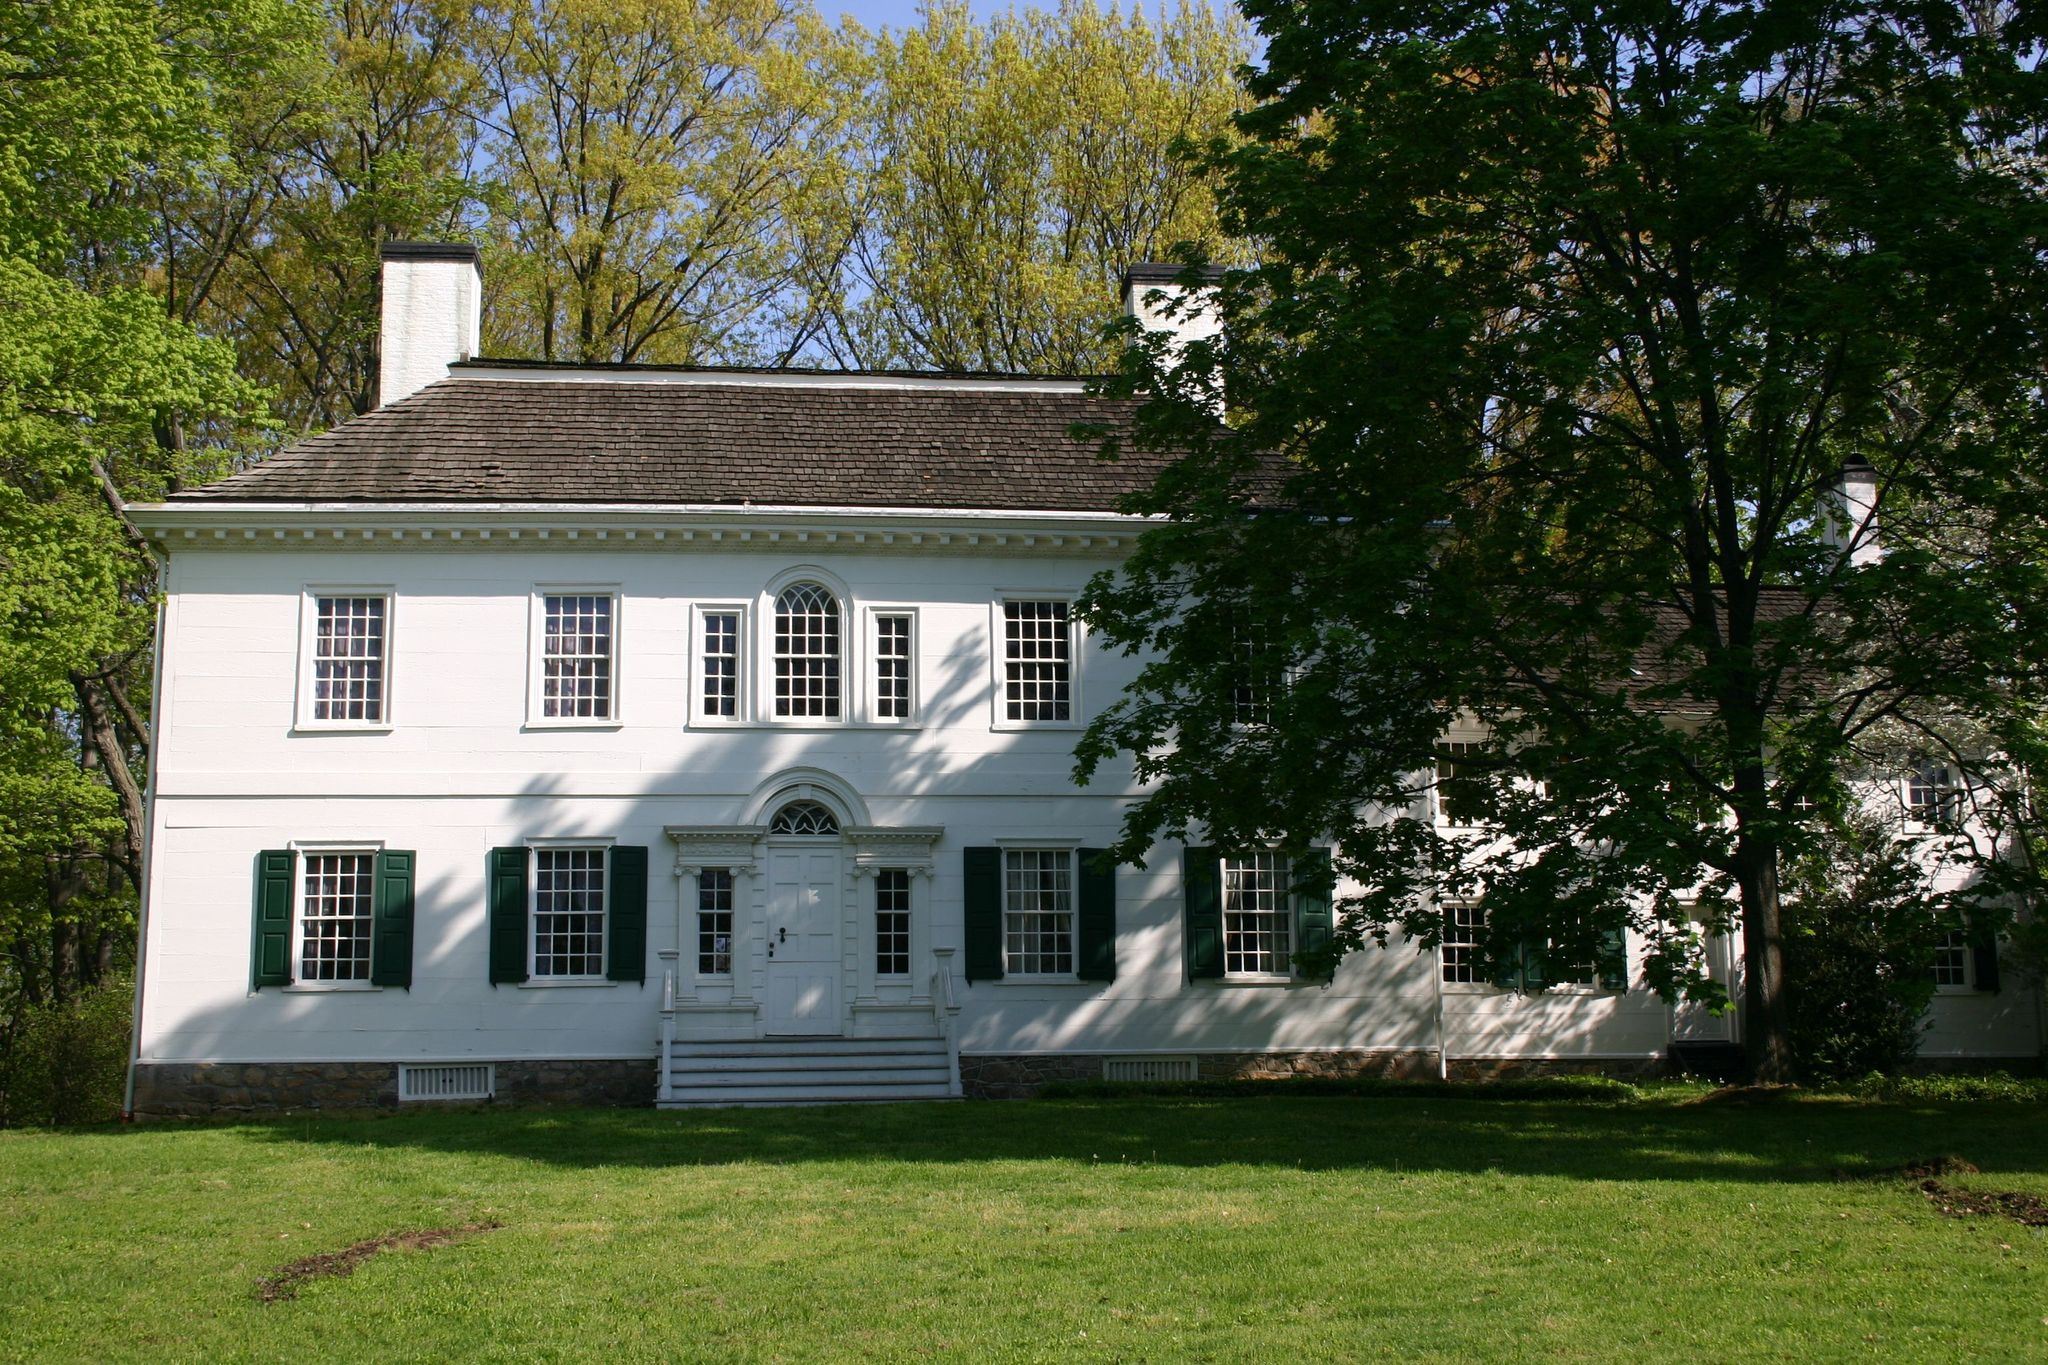 The front facade of the Ford Mansion in summer.